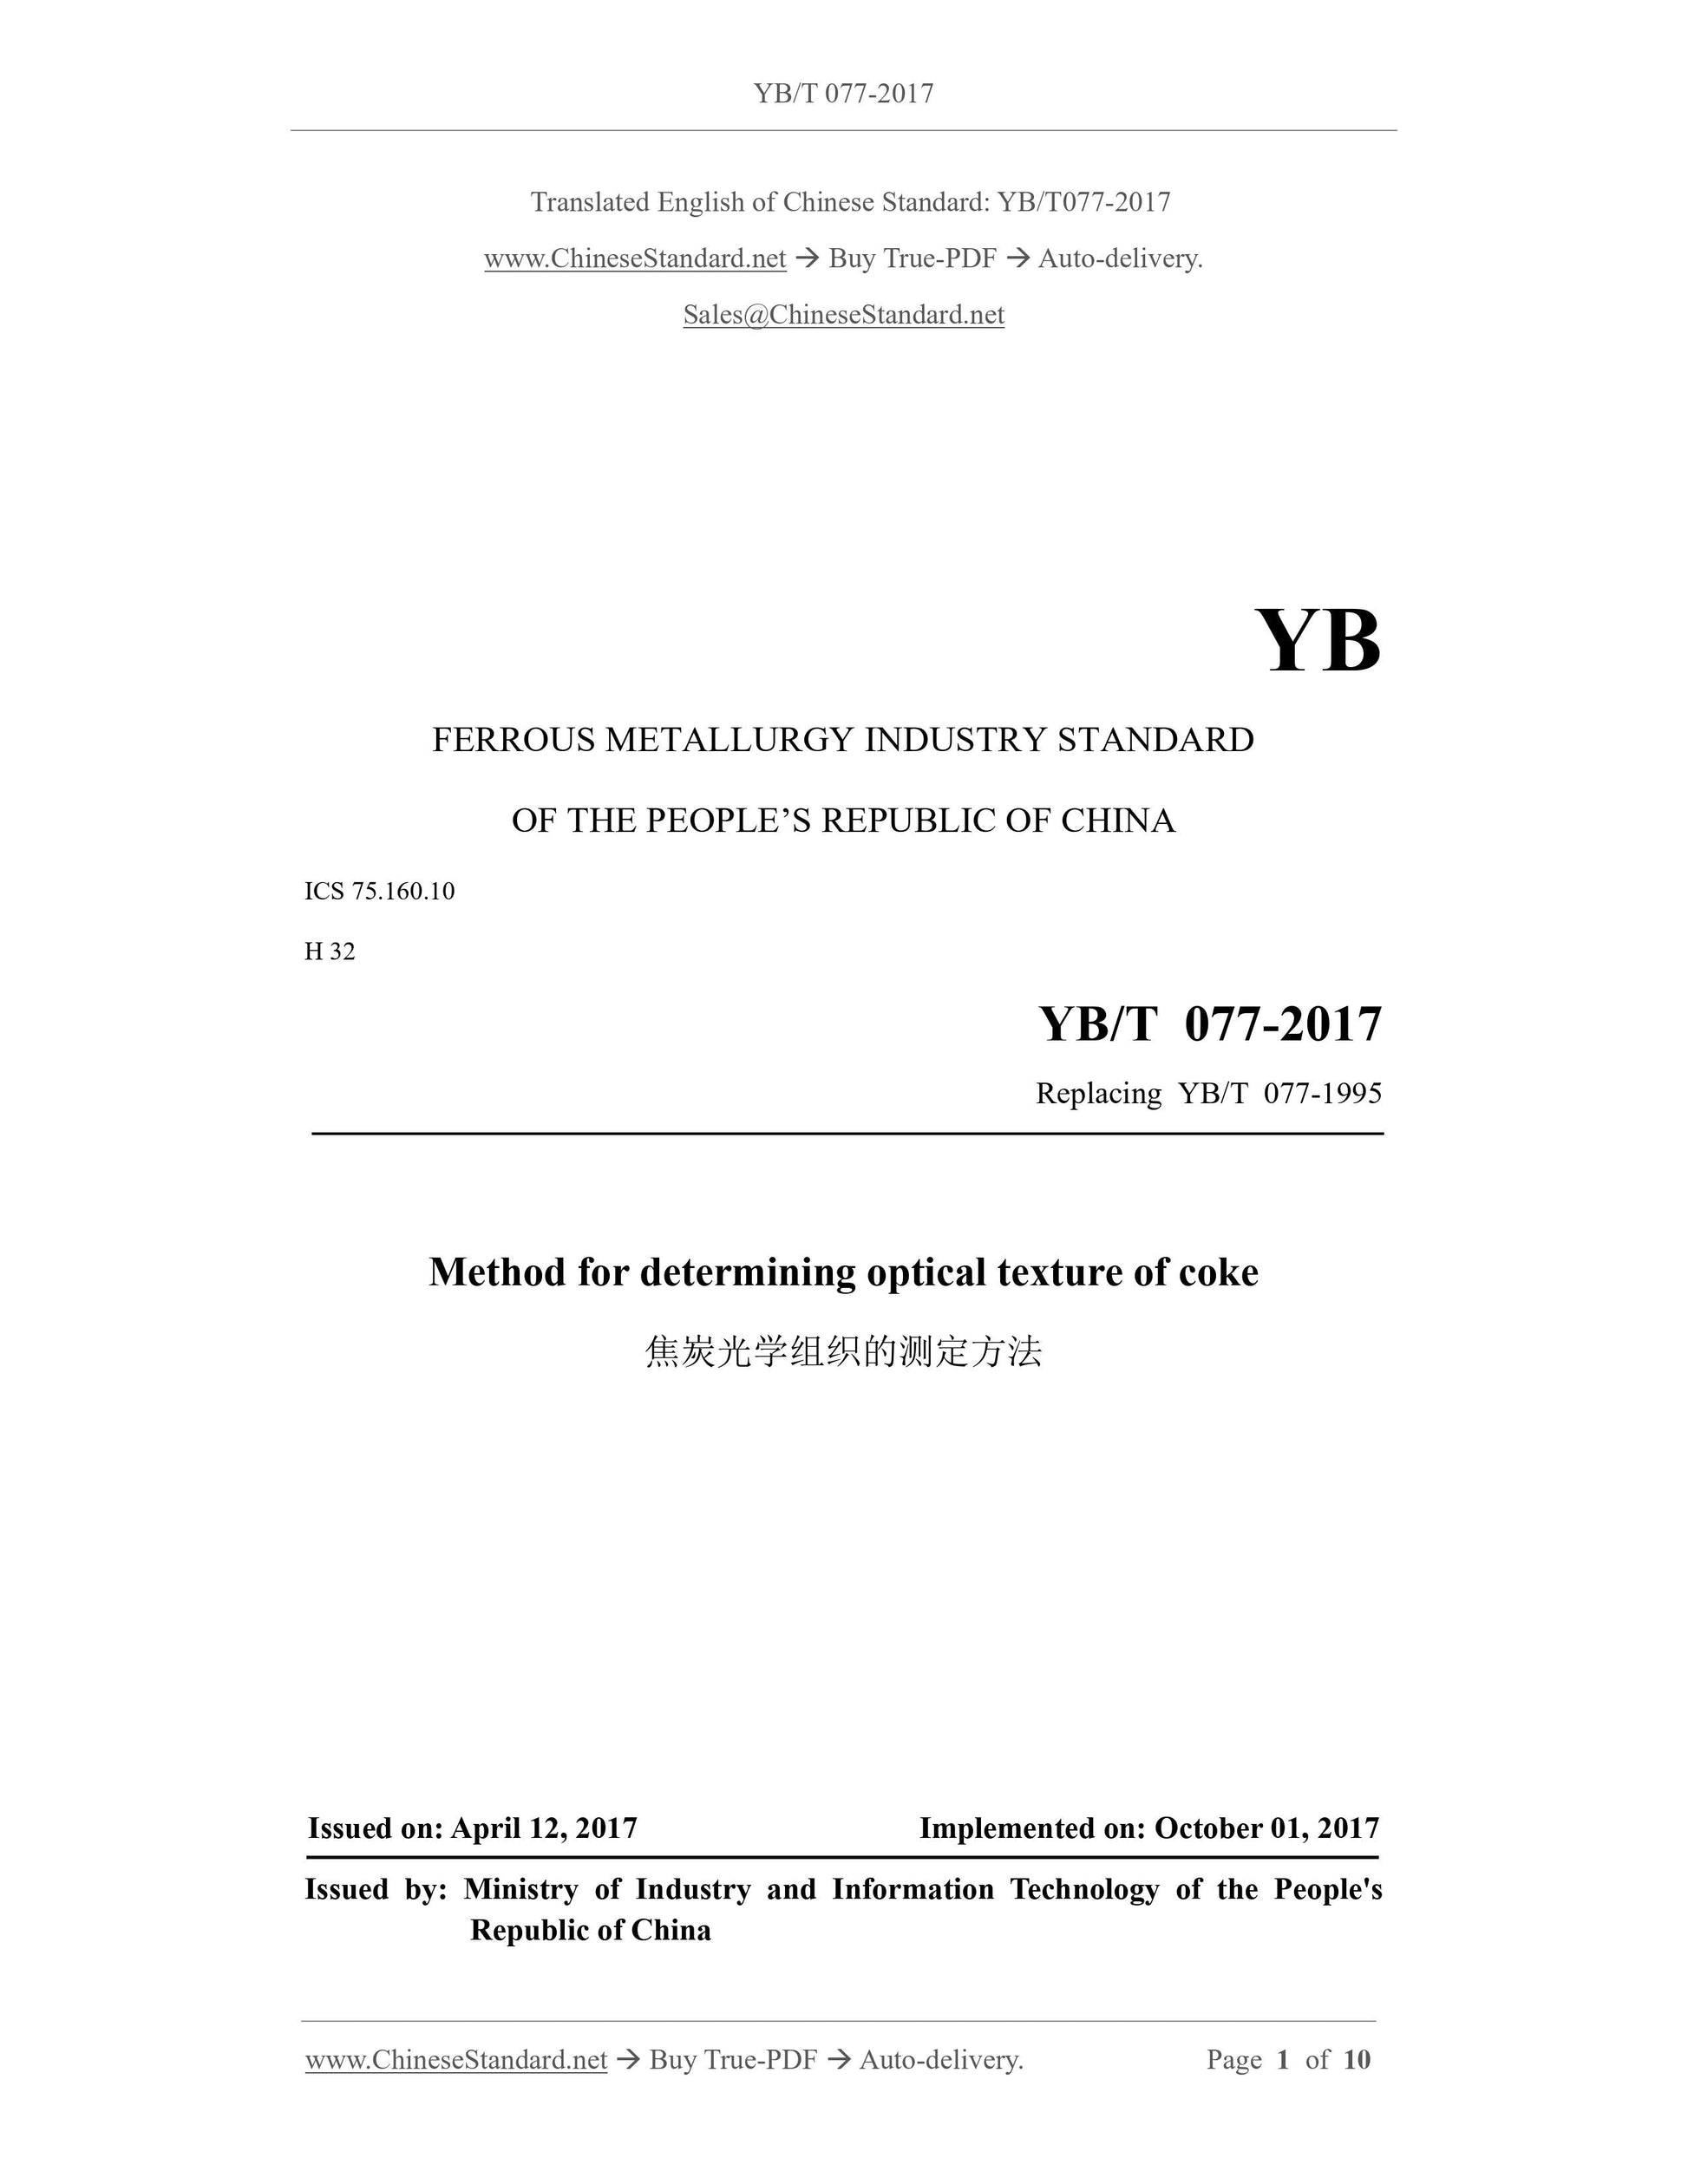 YB/T 077-2017 Page 1